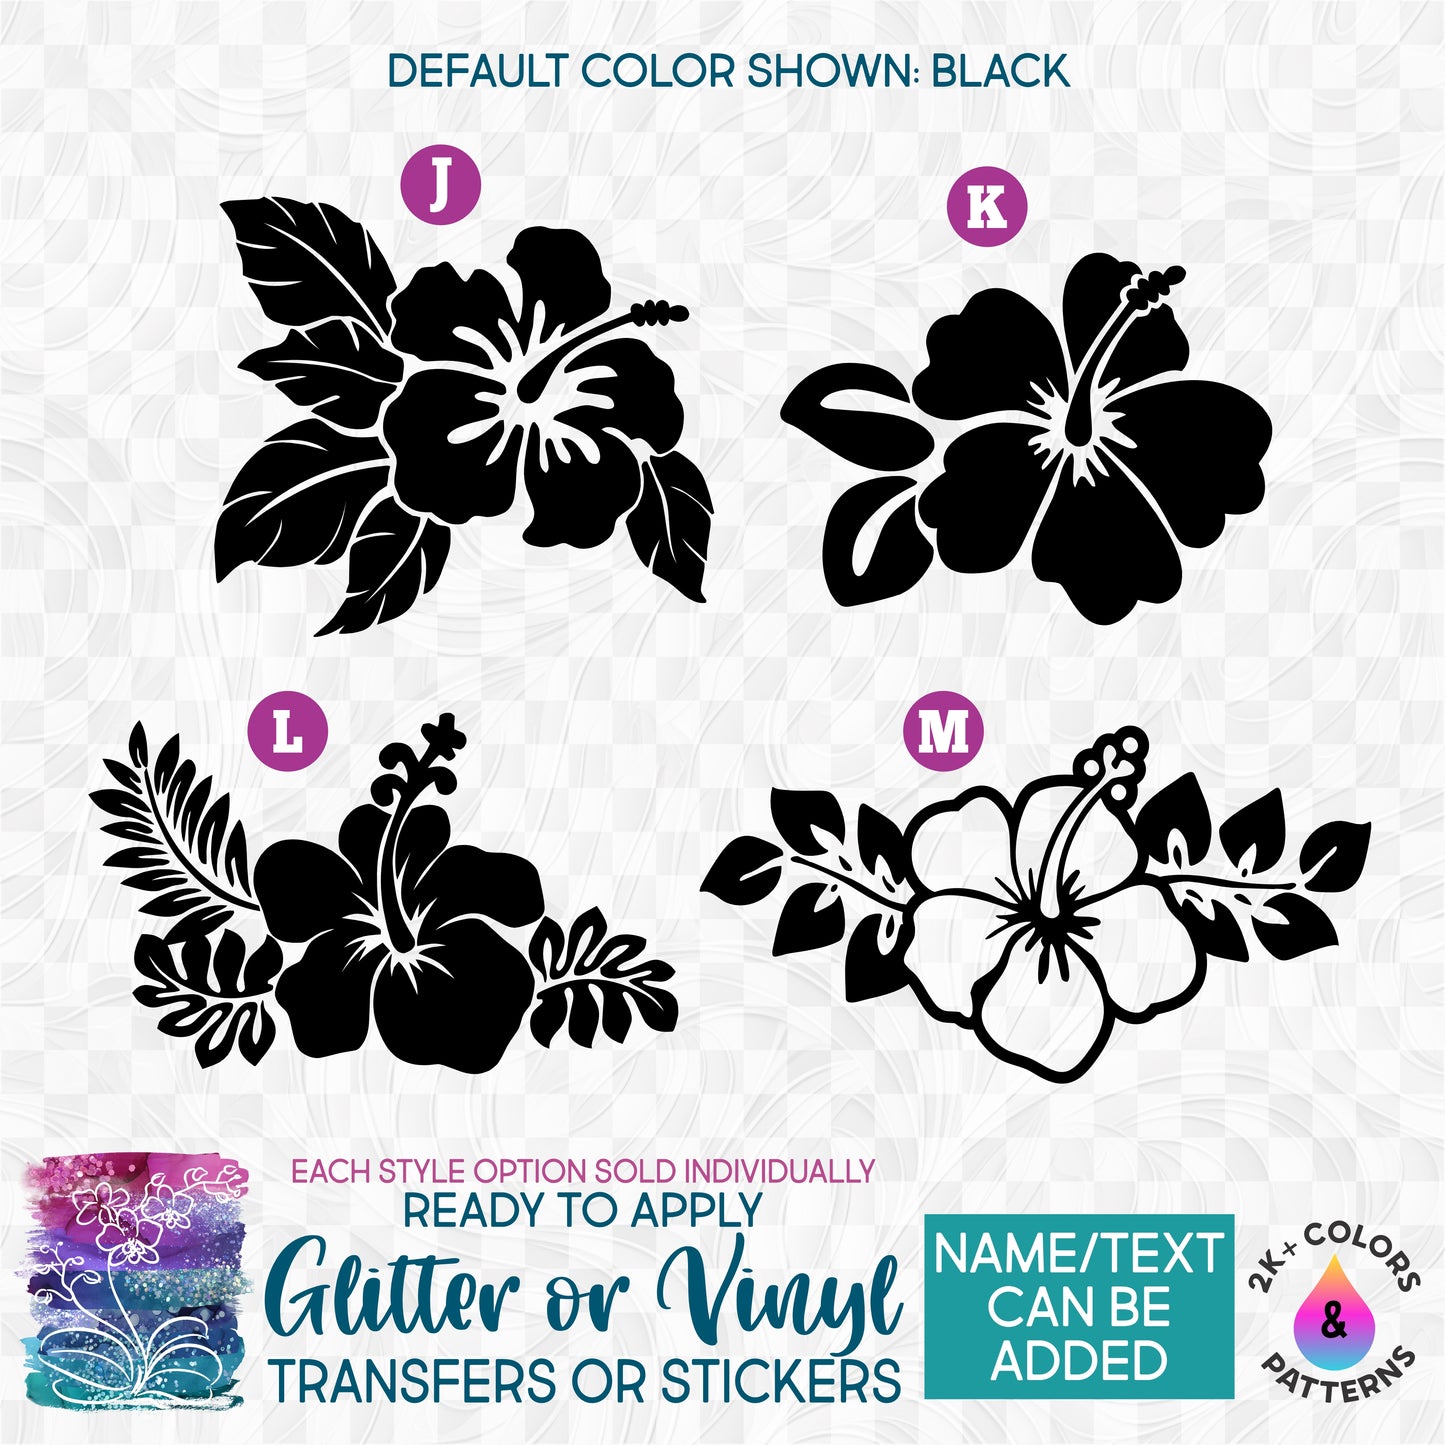 (s021-1) Hibiscus Flowers with Leaves Glitter or Vinyl Iron-On Transfer or Sticker